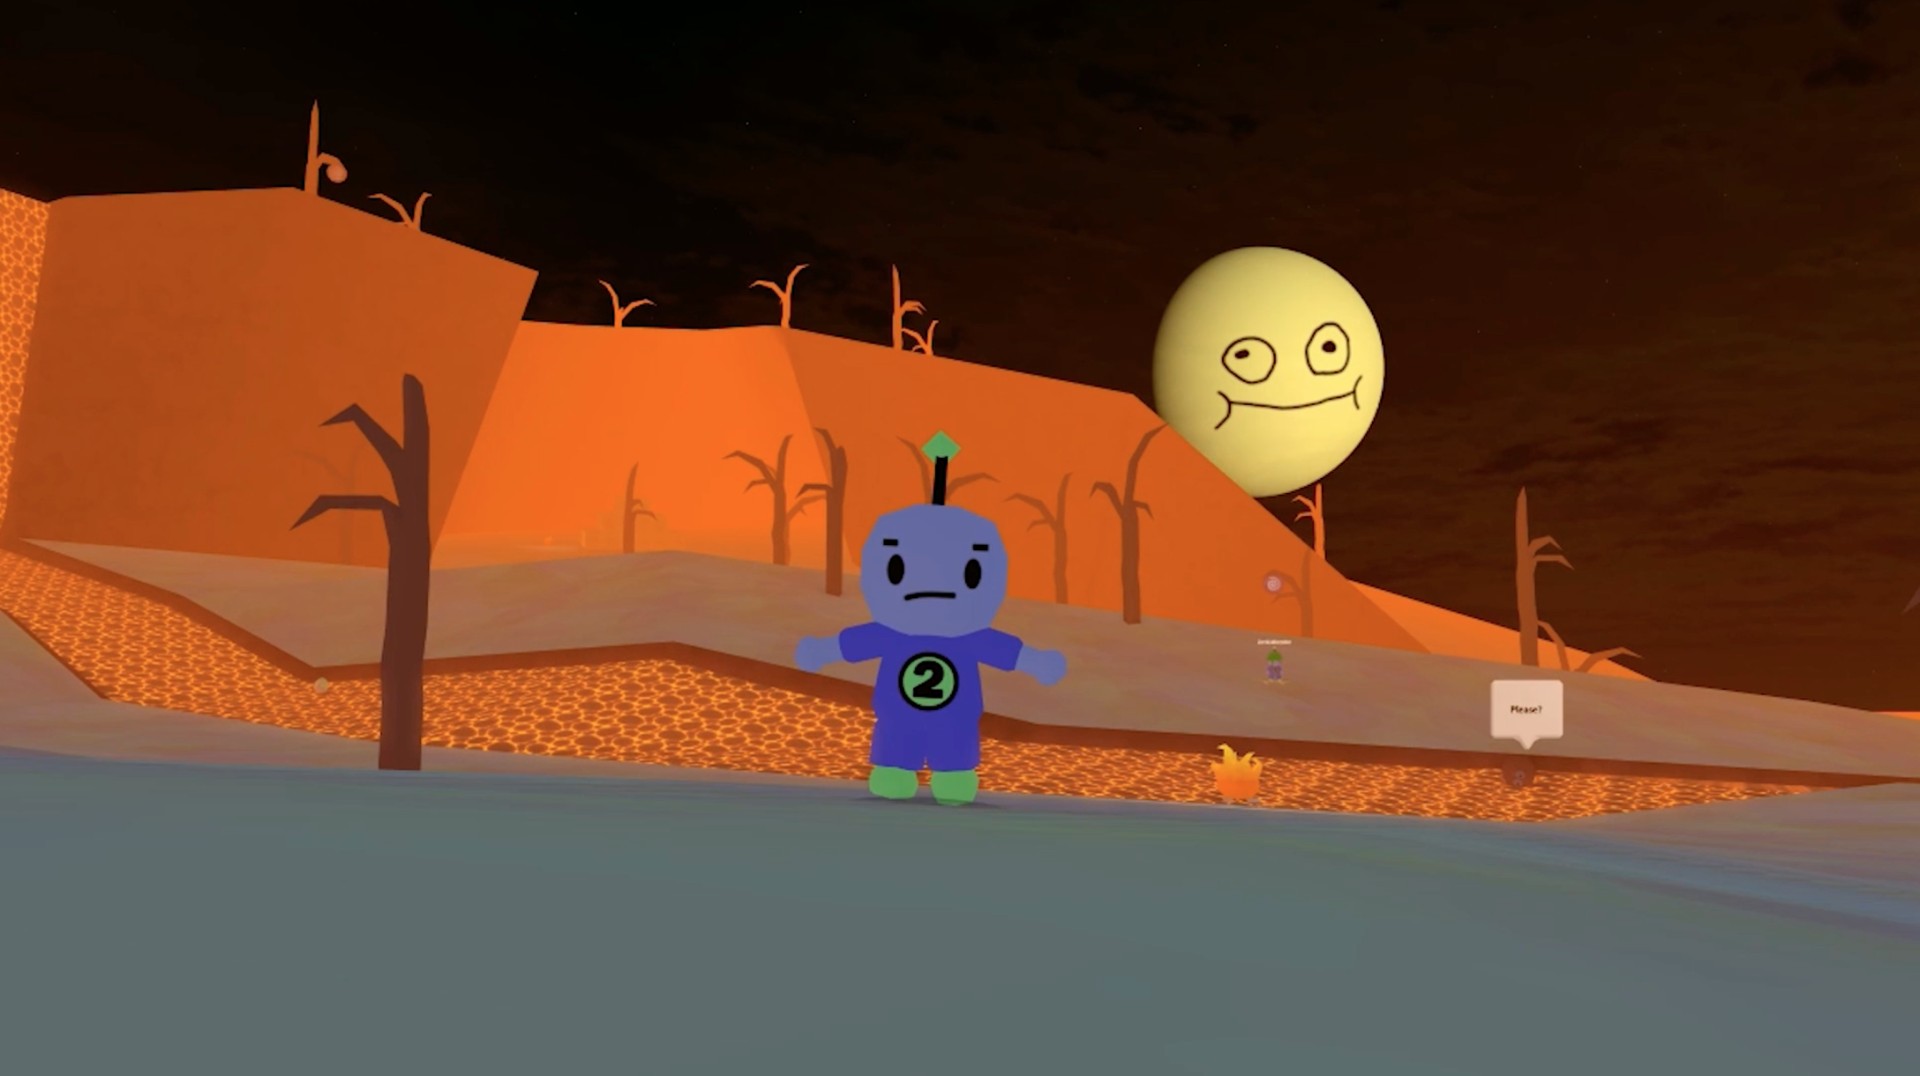 3d Platformer Robot 64 Is Now Available On Roblox For Xbox One Xbox Wire - roblox robot pictures